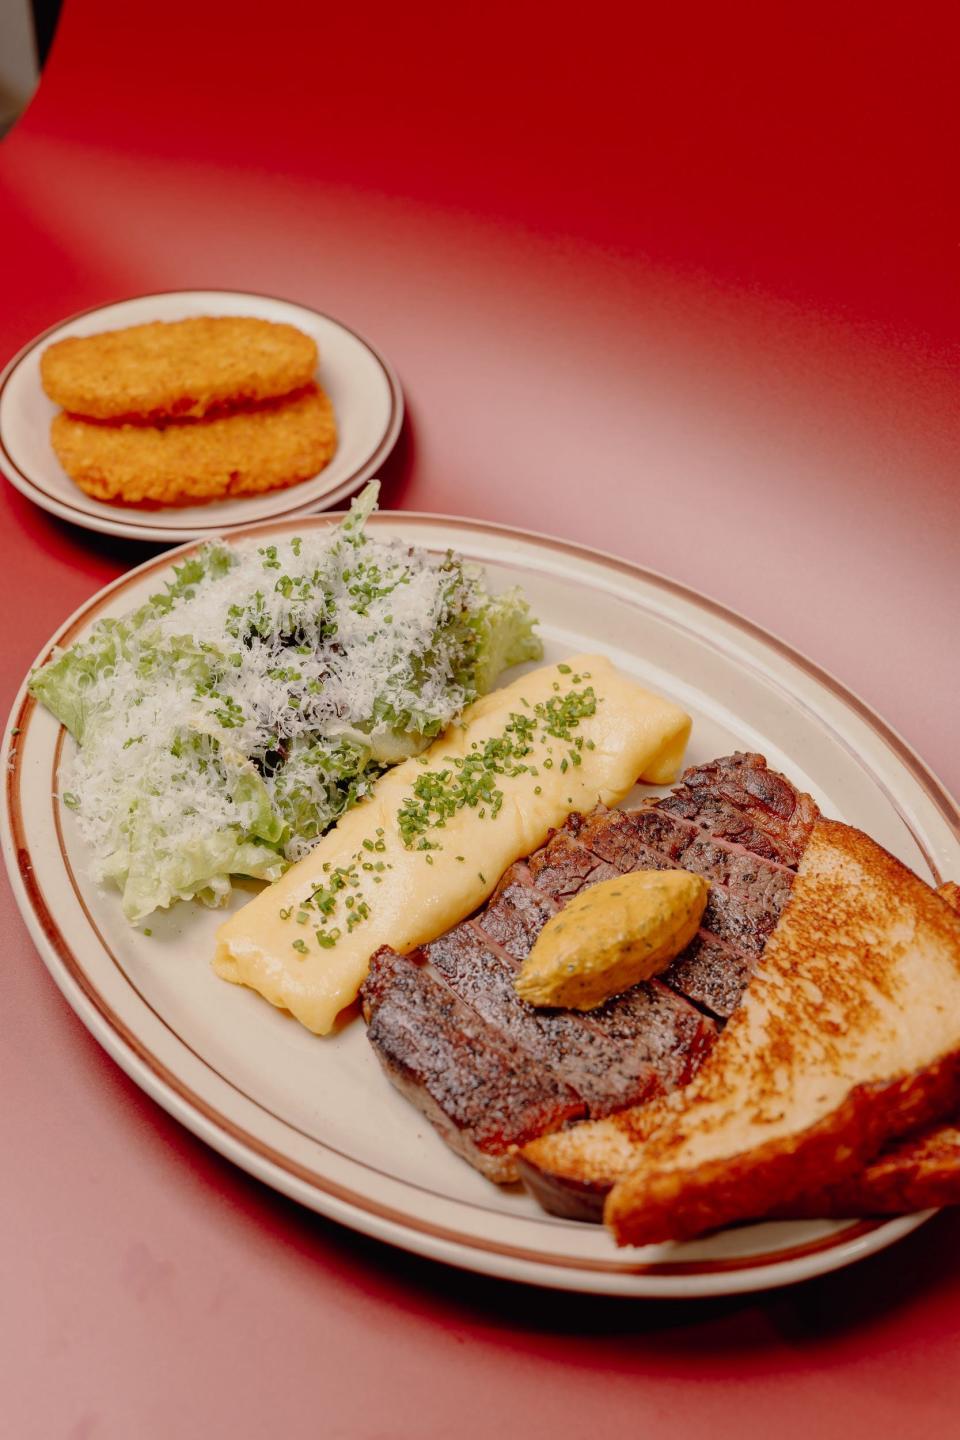 Steak and Eggs at Kinfolk, a diner in Downtown Memphis. A 6-ounce Home Place Pastures NY Strip is served with two eggs, cowboy butter, hash browns or grits, dressed side salad, a buttermilk honey butter biscuit or milk bread toast.